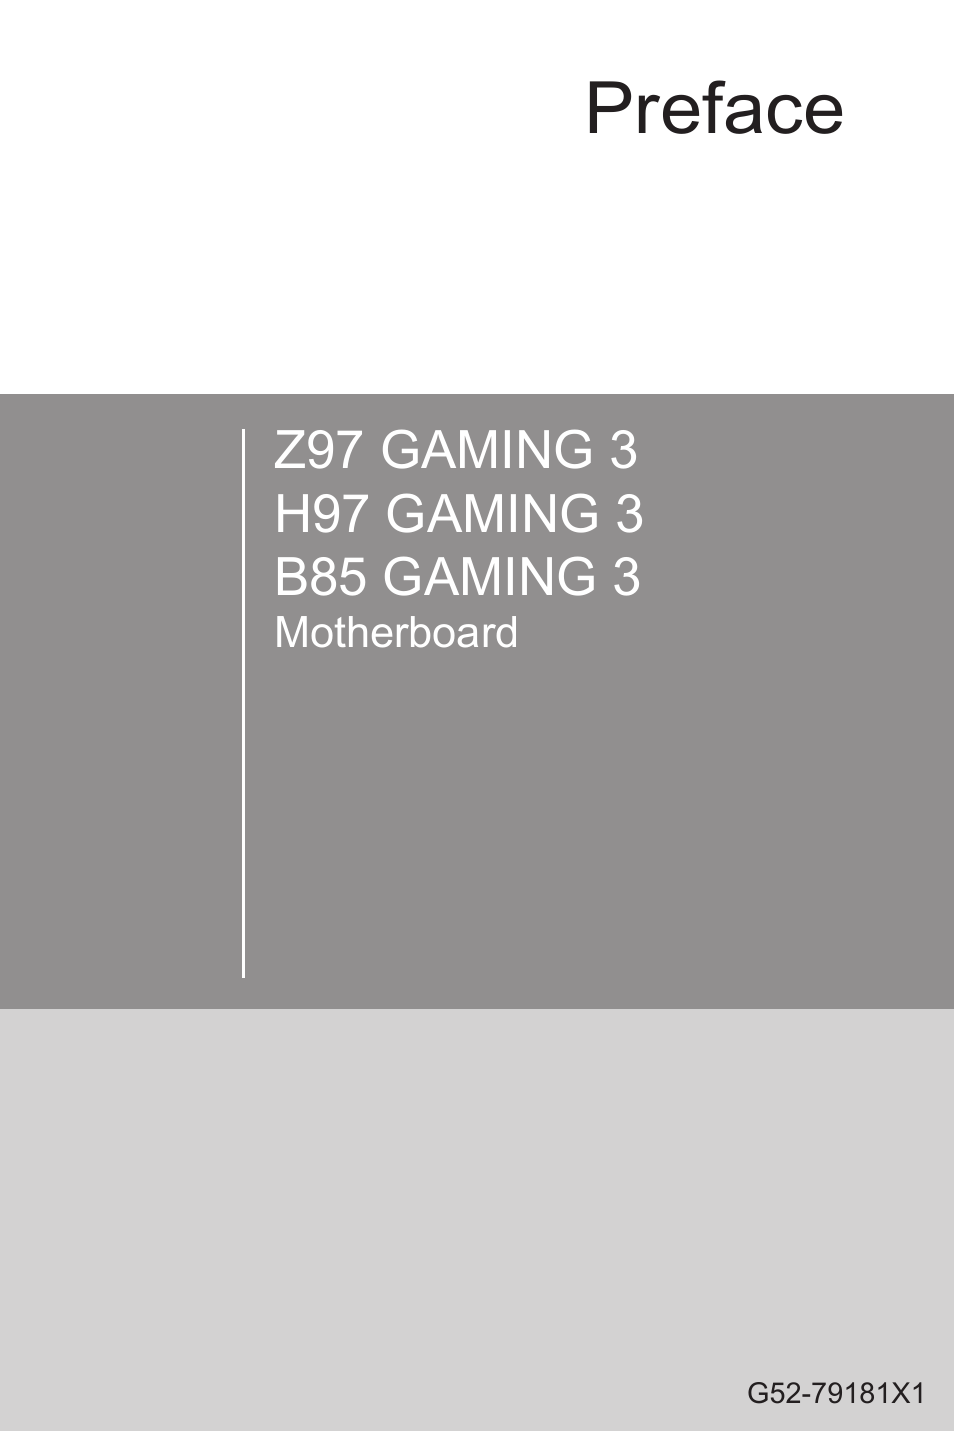 MSI H97 GAMING 3 Manual User Manual | 112 pages | Also for: Z97 GAMING